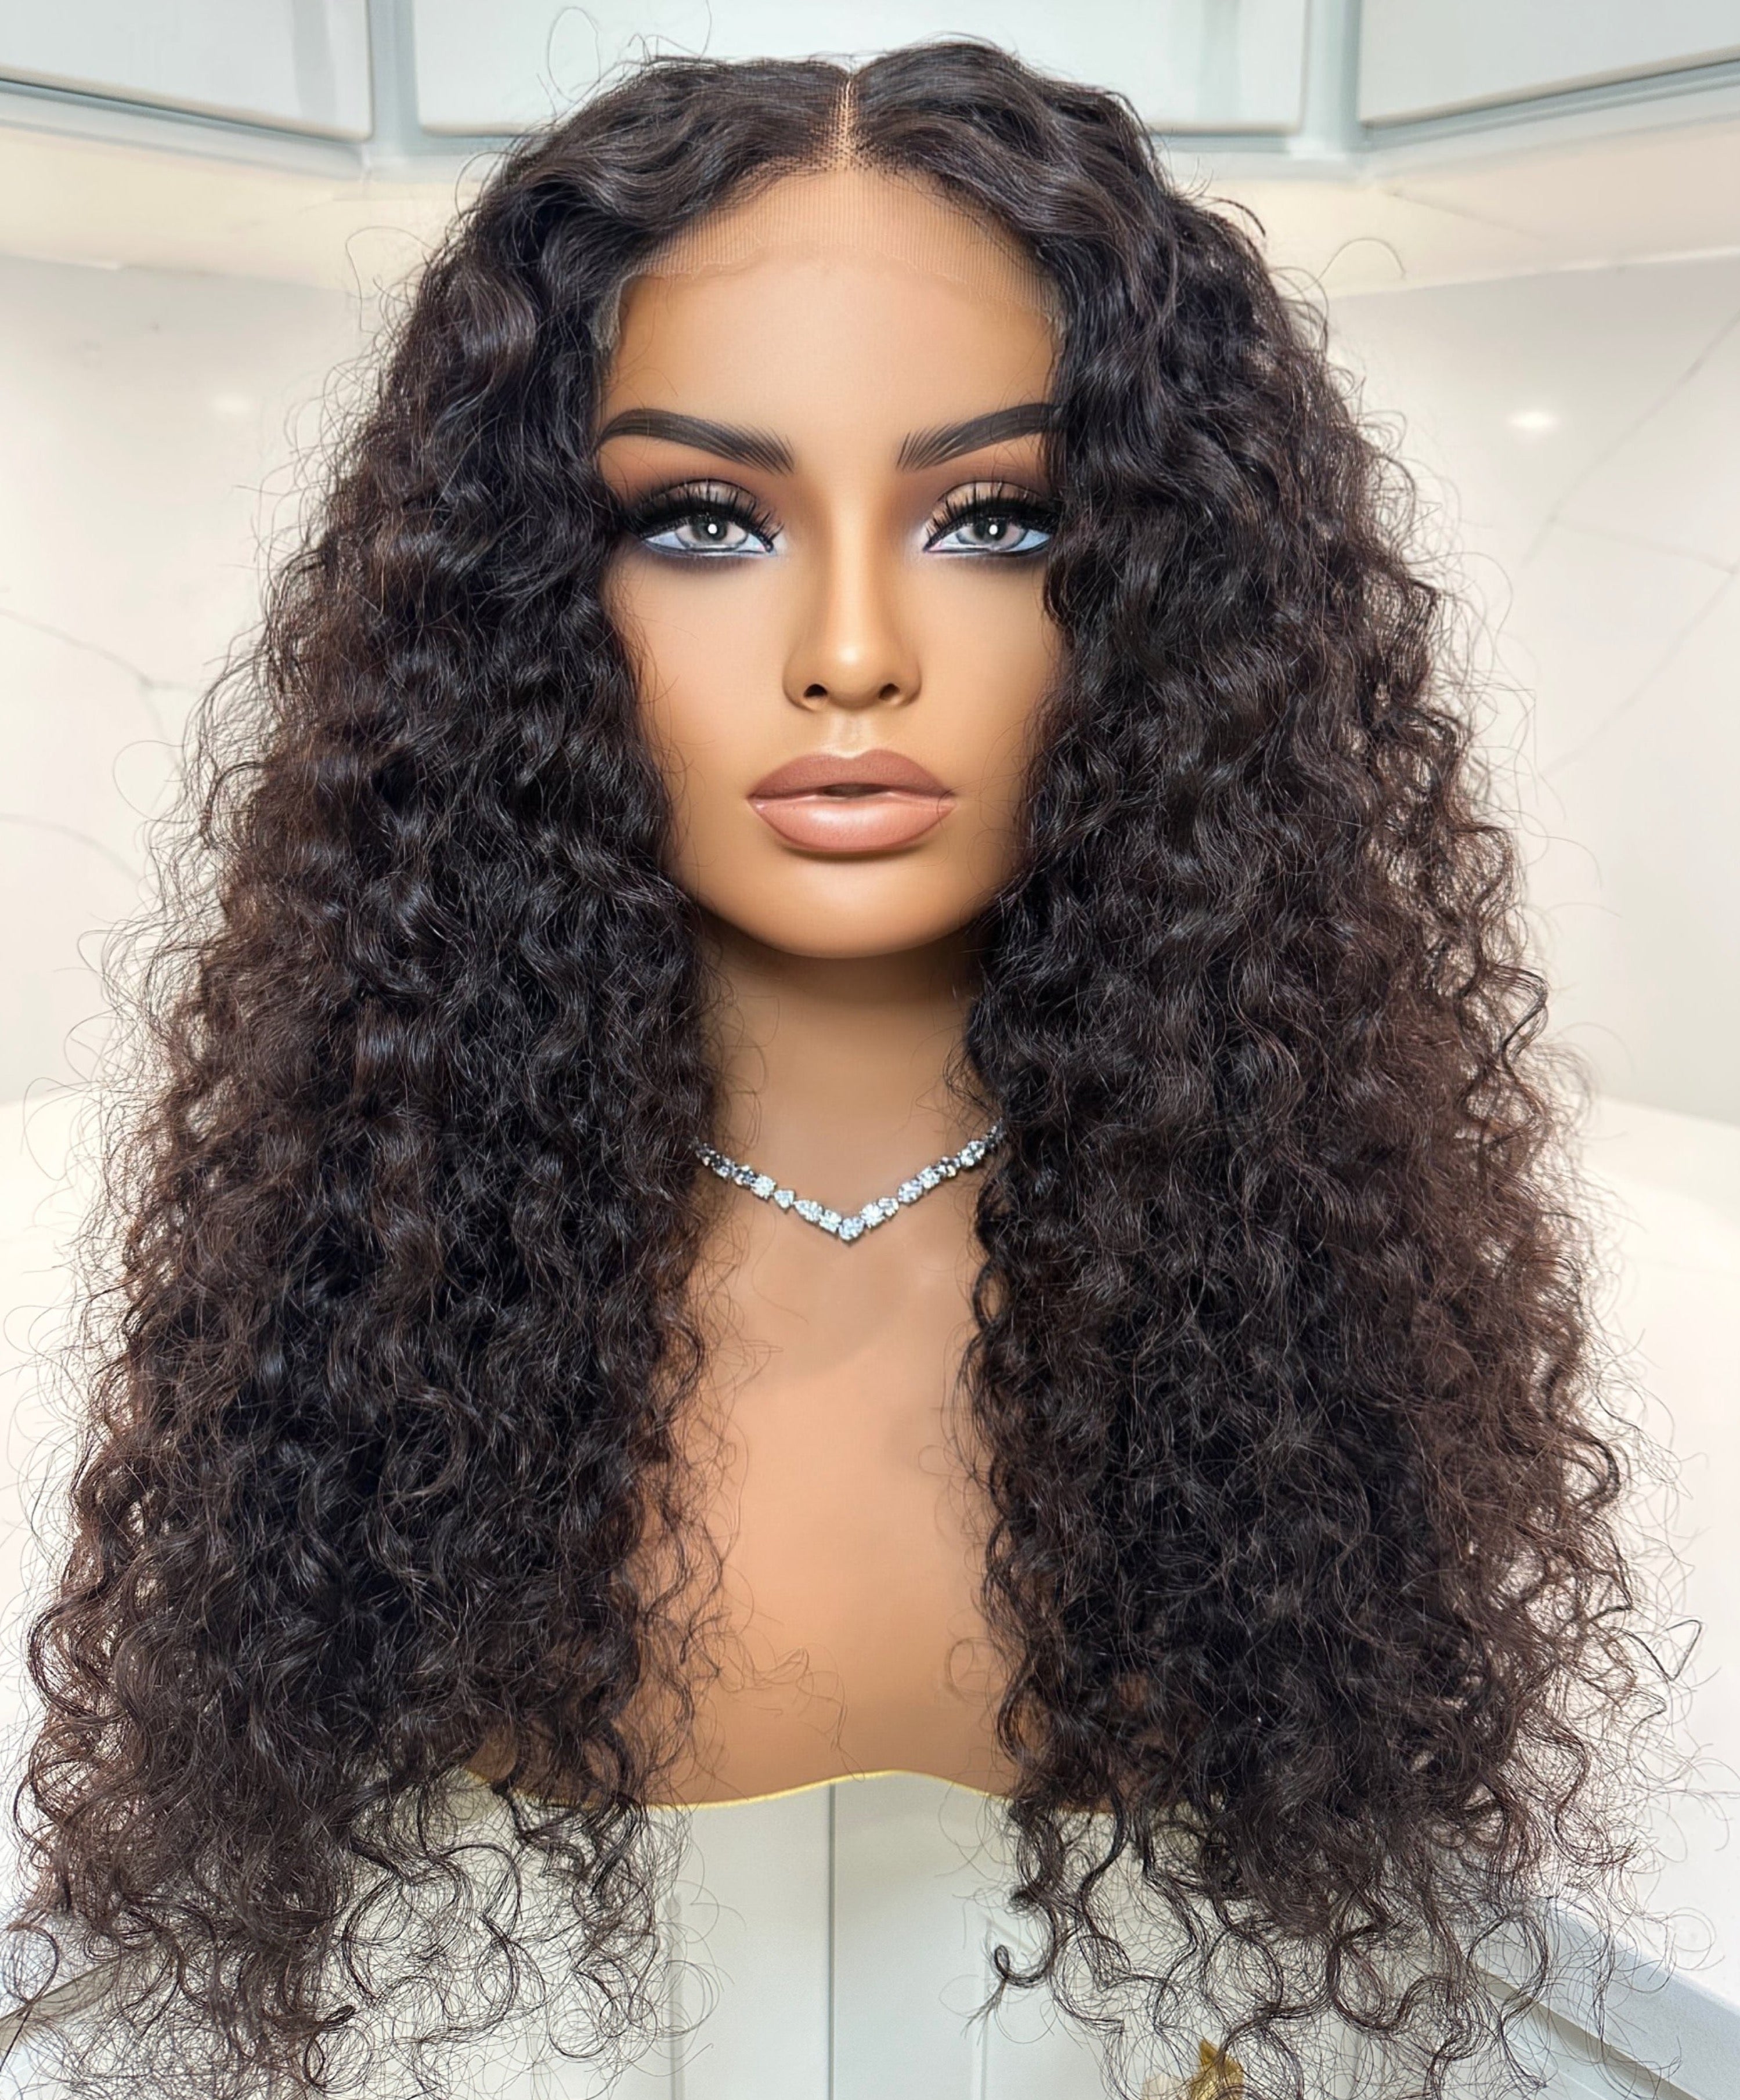 S.ADAMS COLLECTION - VIRGIN HAIR AND LACE WIGS